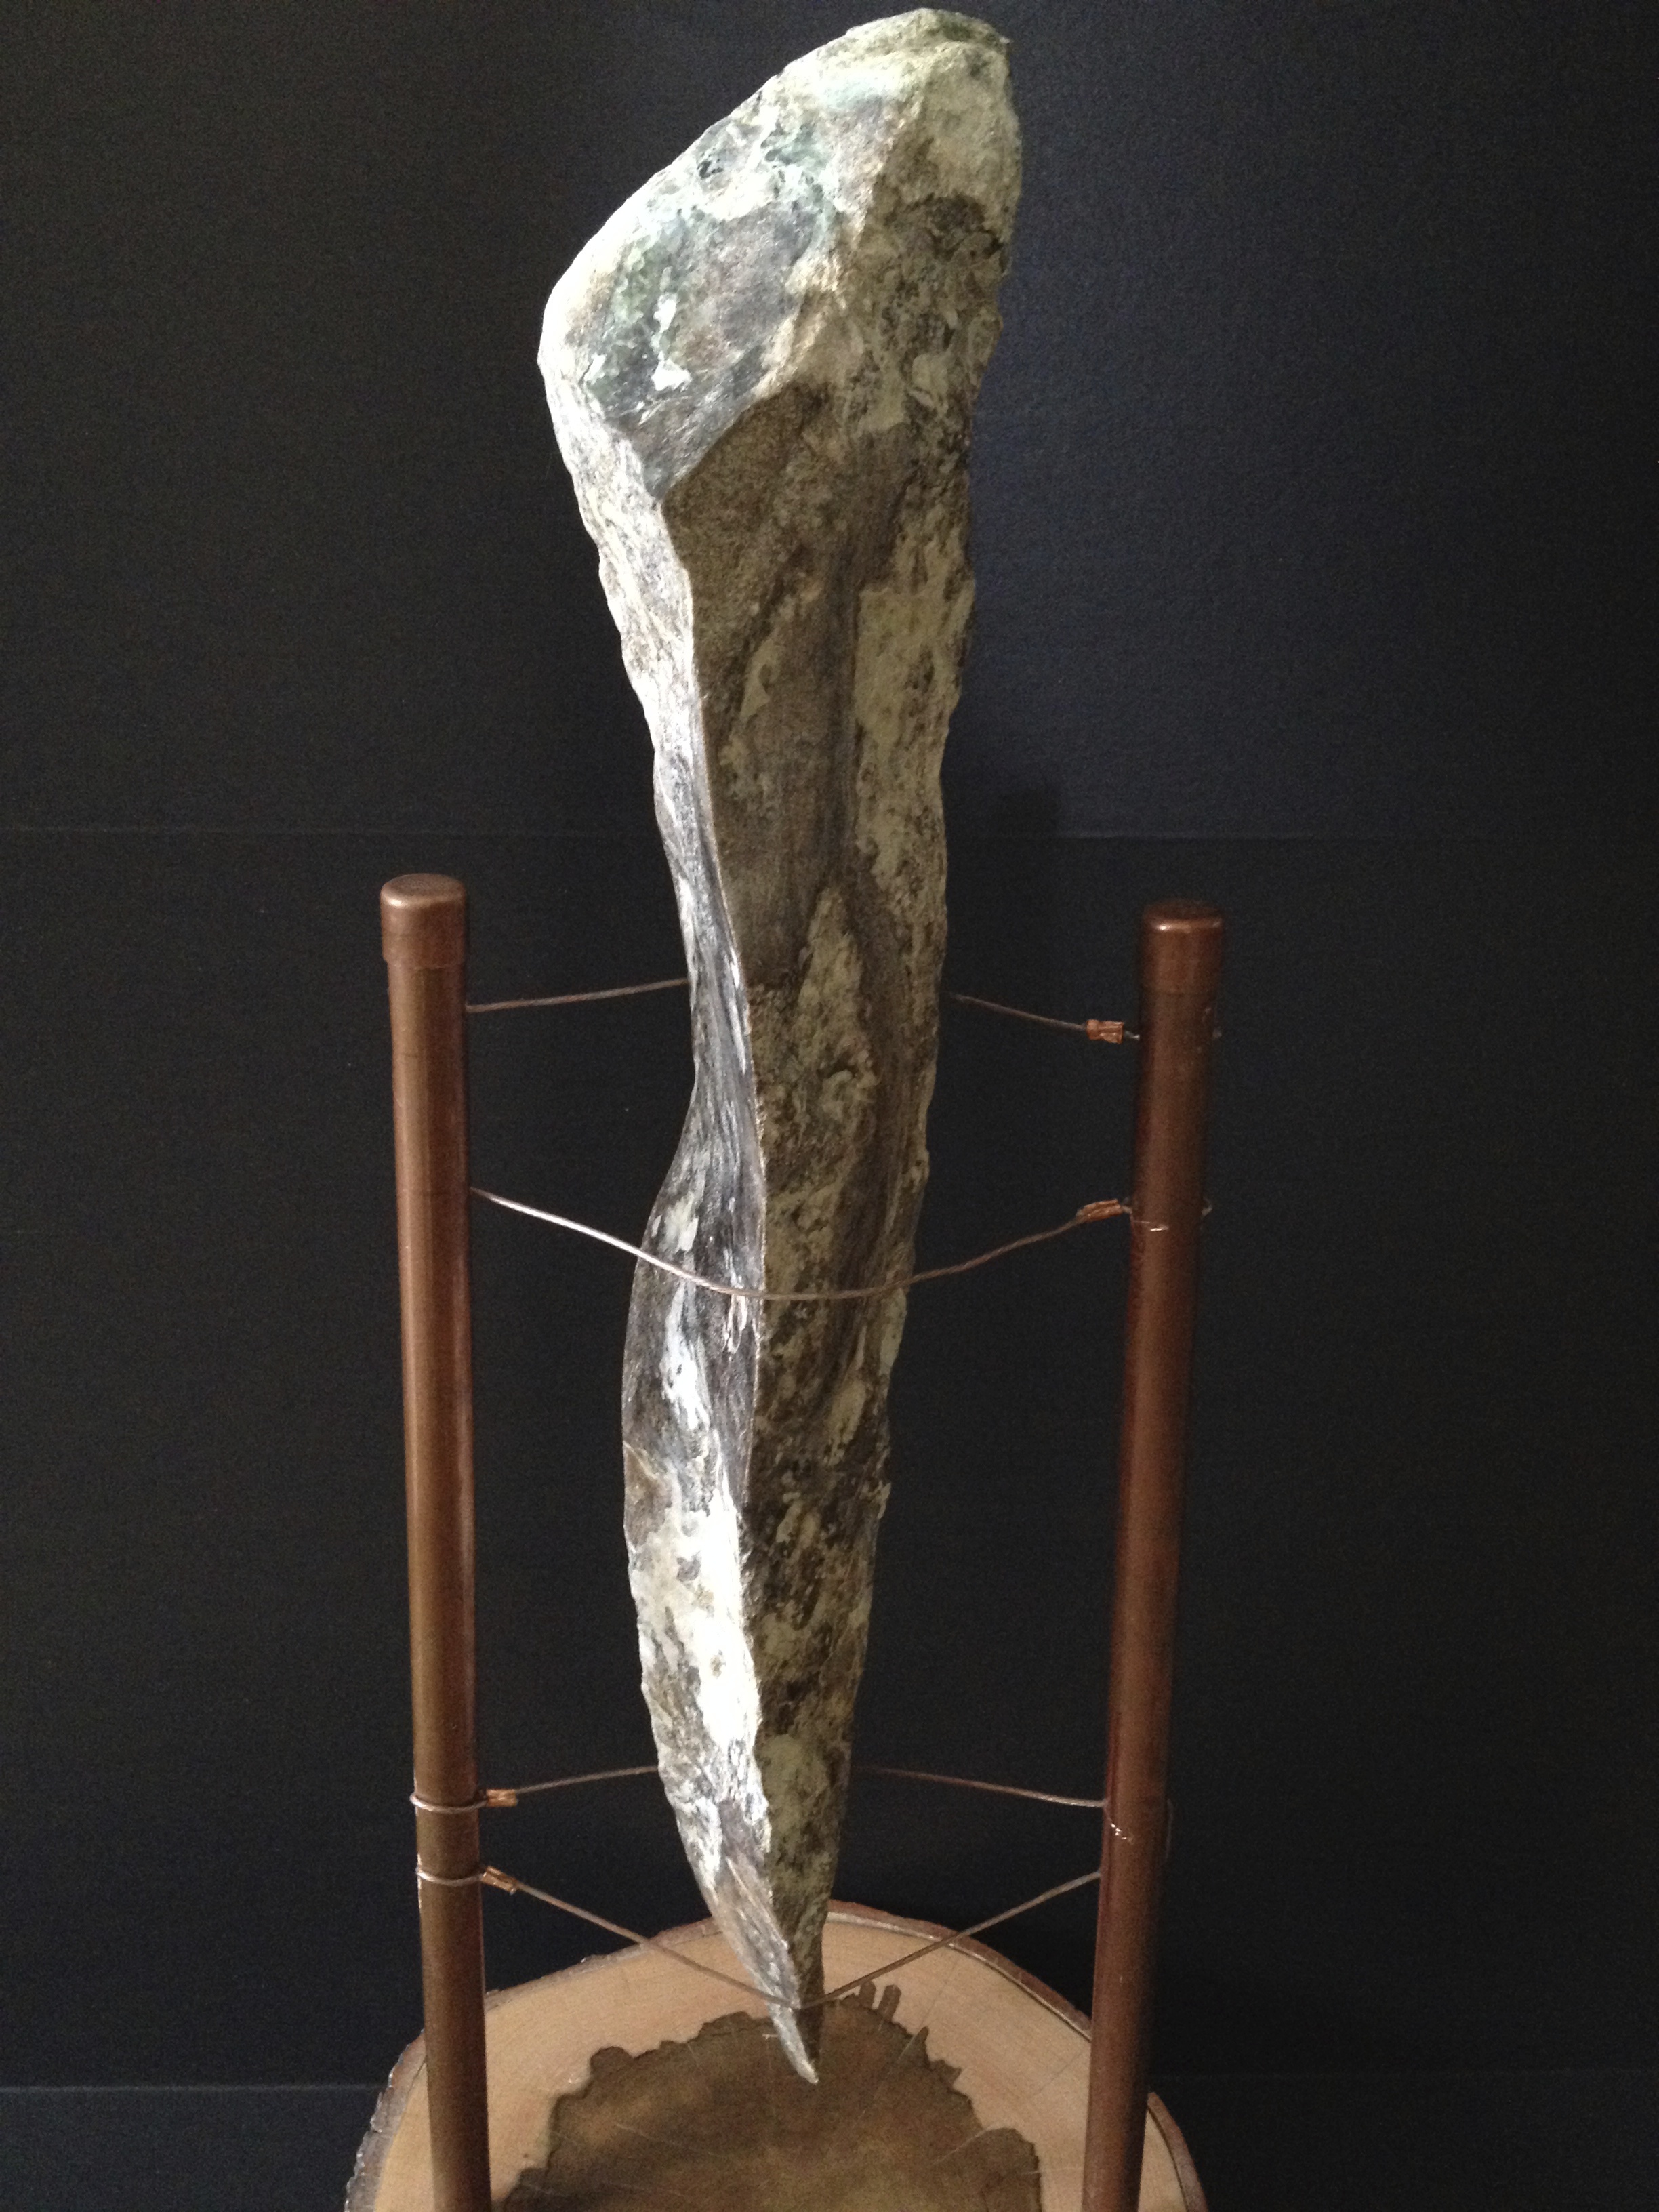 Patty McPhee “Woven Shard”, 35” X 13” X 12”, marble, copper and wood 